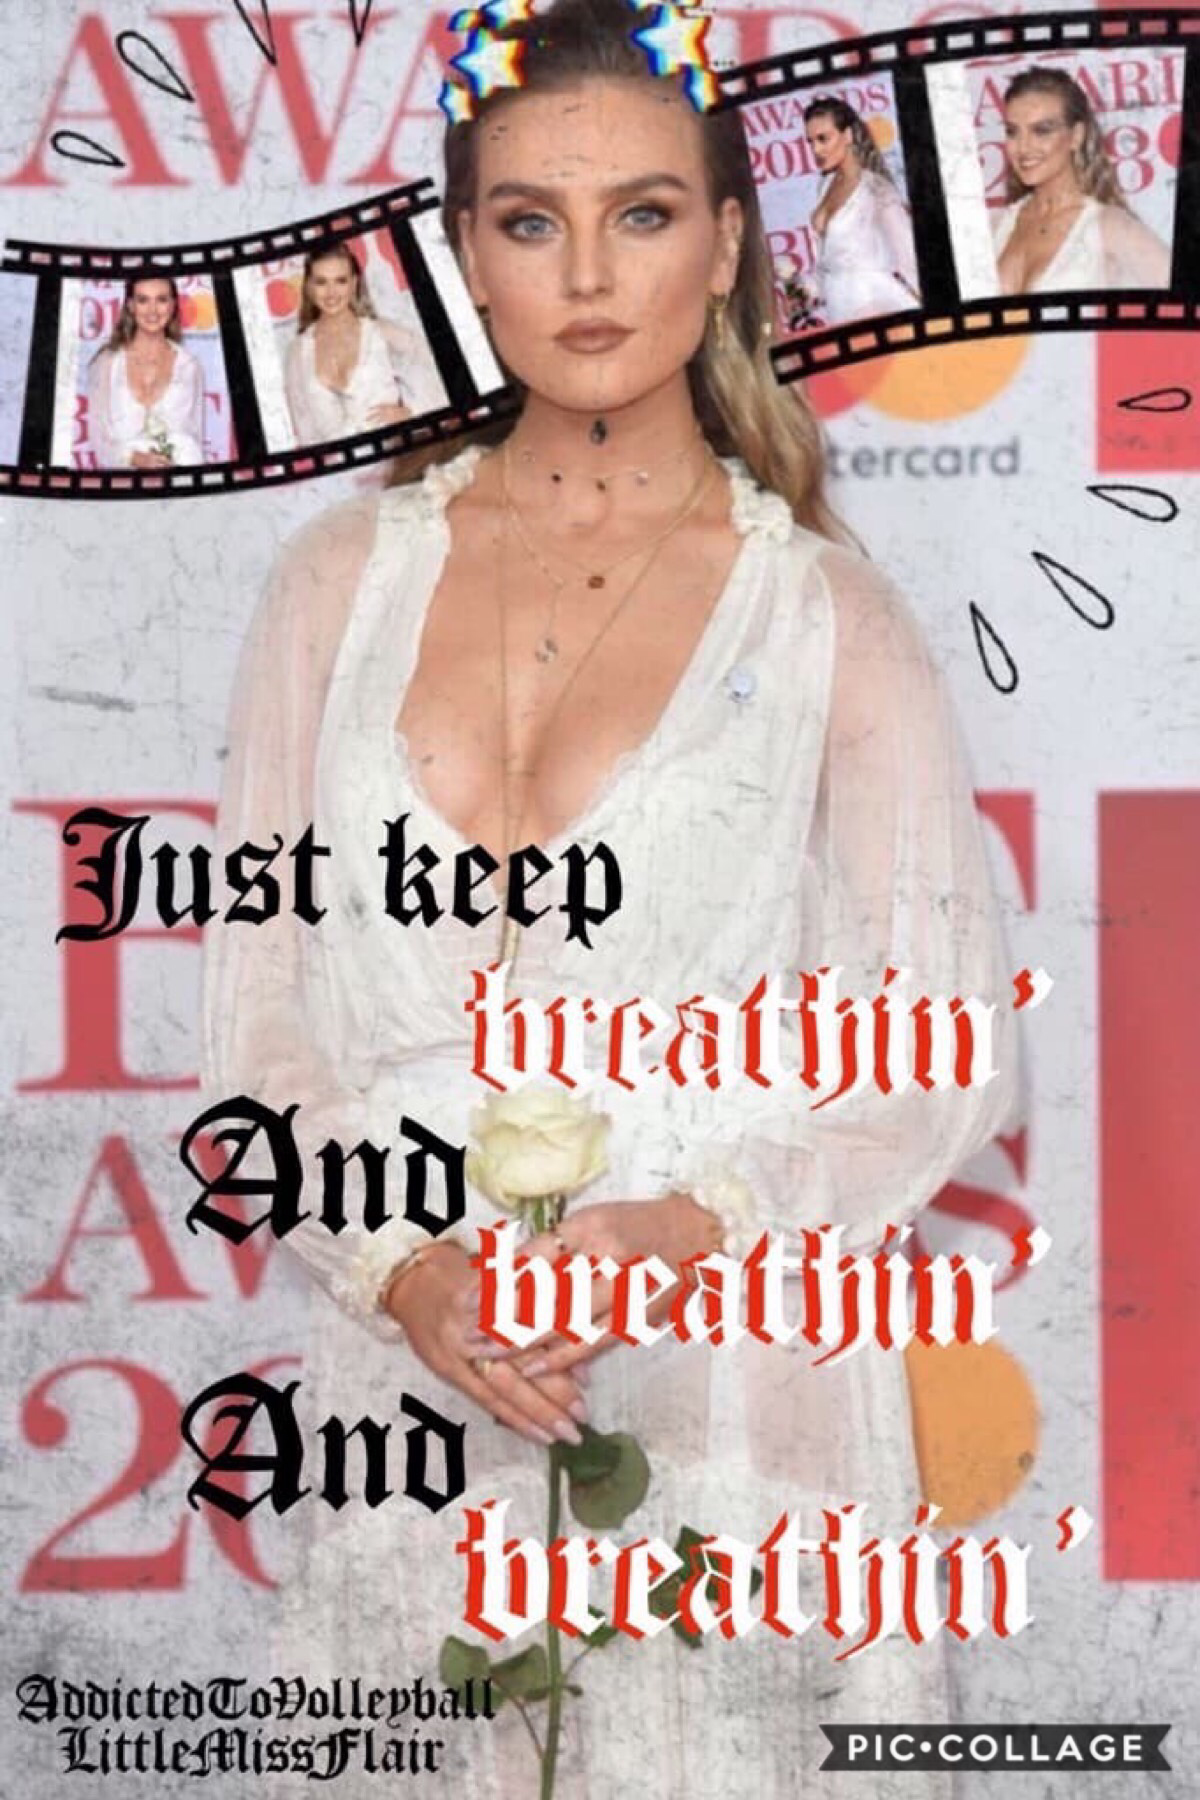 😍Tap😍

Collab with my best friend❤️ Audrey!! I love collabing with her💕 the song is breathin by Ariana Grande (Sweetener Album)! The person is Perrie Edwards!- become obsessed with her lately! 🍂🍂